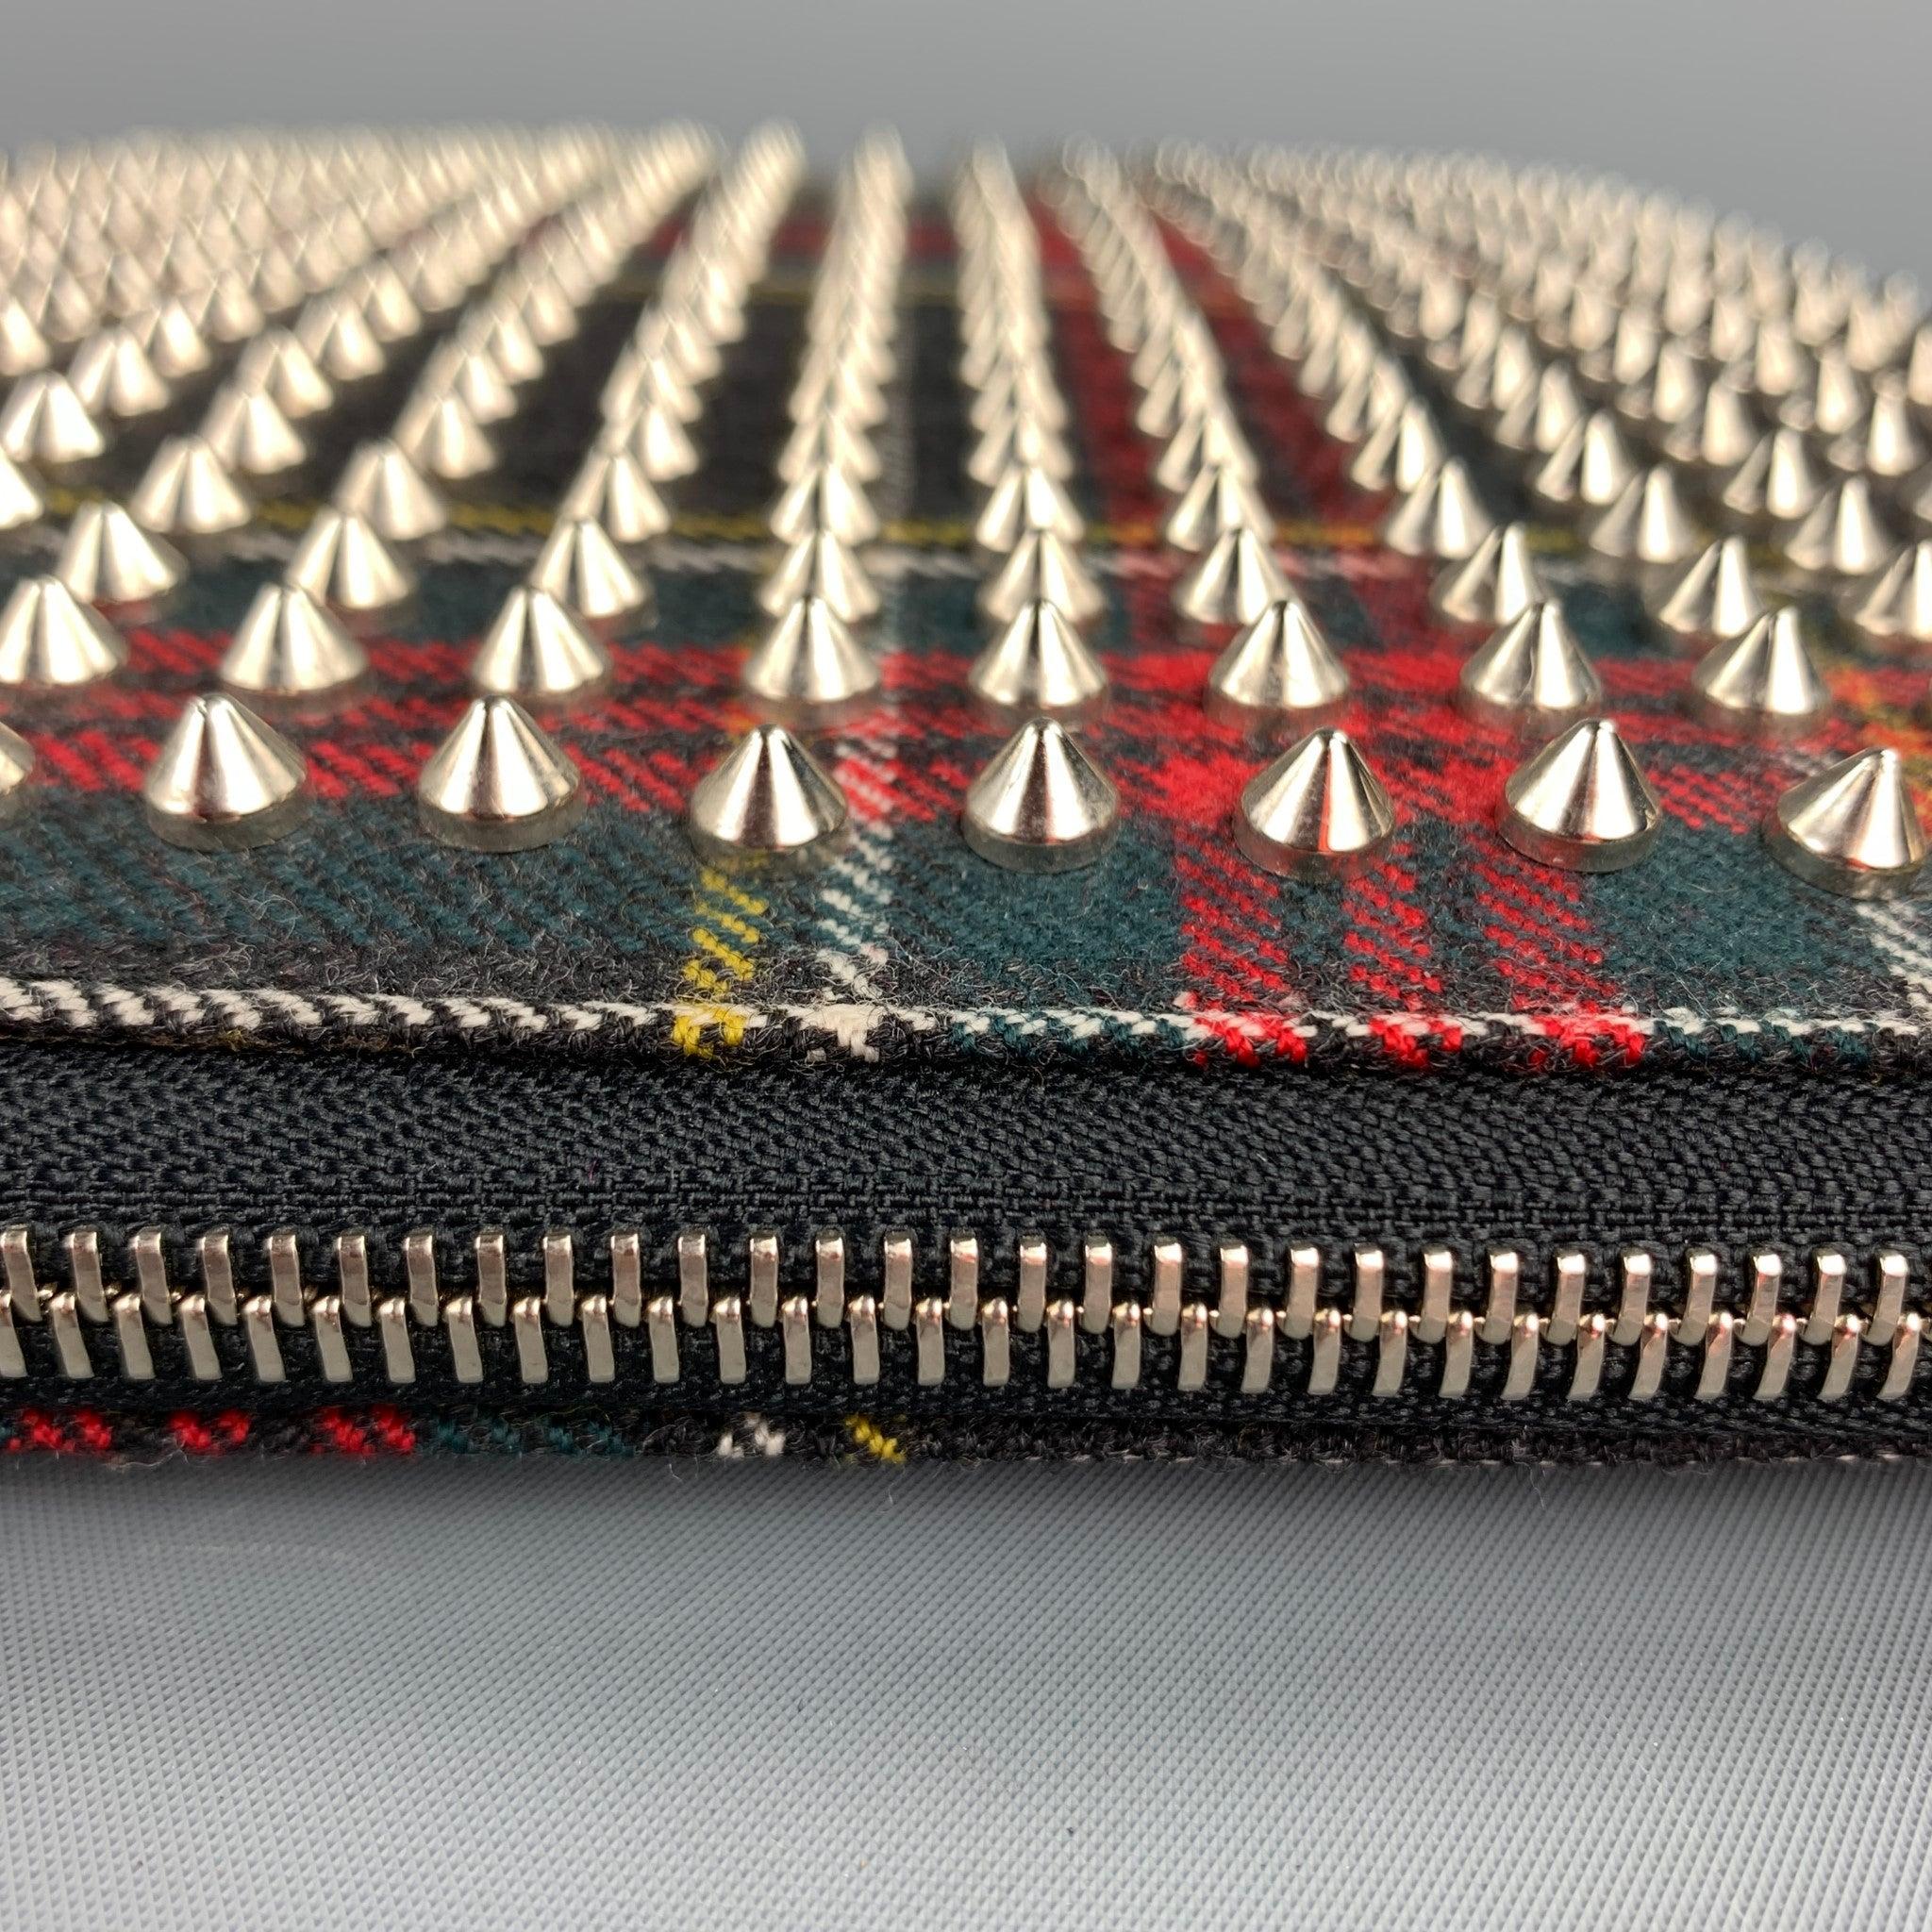 CHRISTIAN LOUBOUTIN Black & Red Plaid Canvas Spike iPad Case In Good Condition For Sale In San Francisco, CA